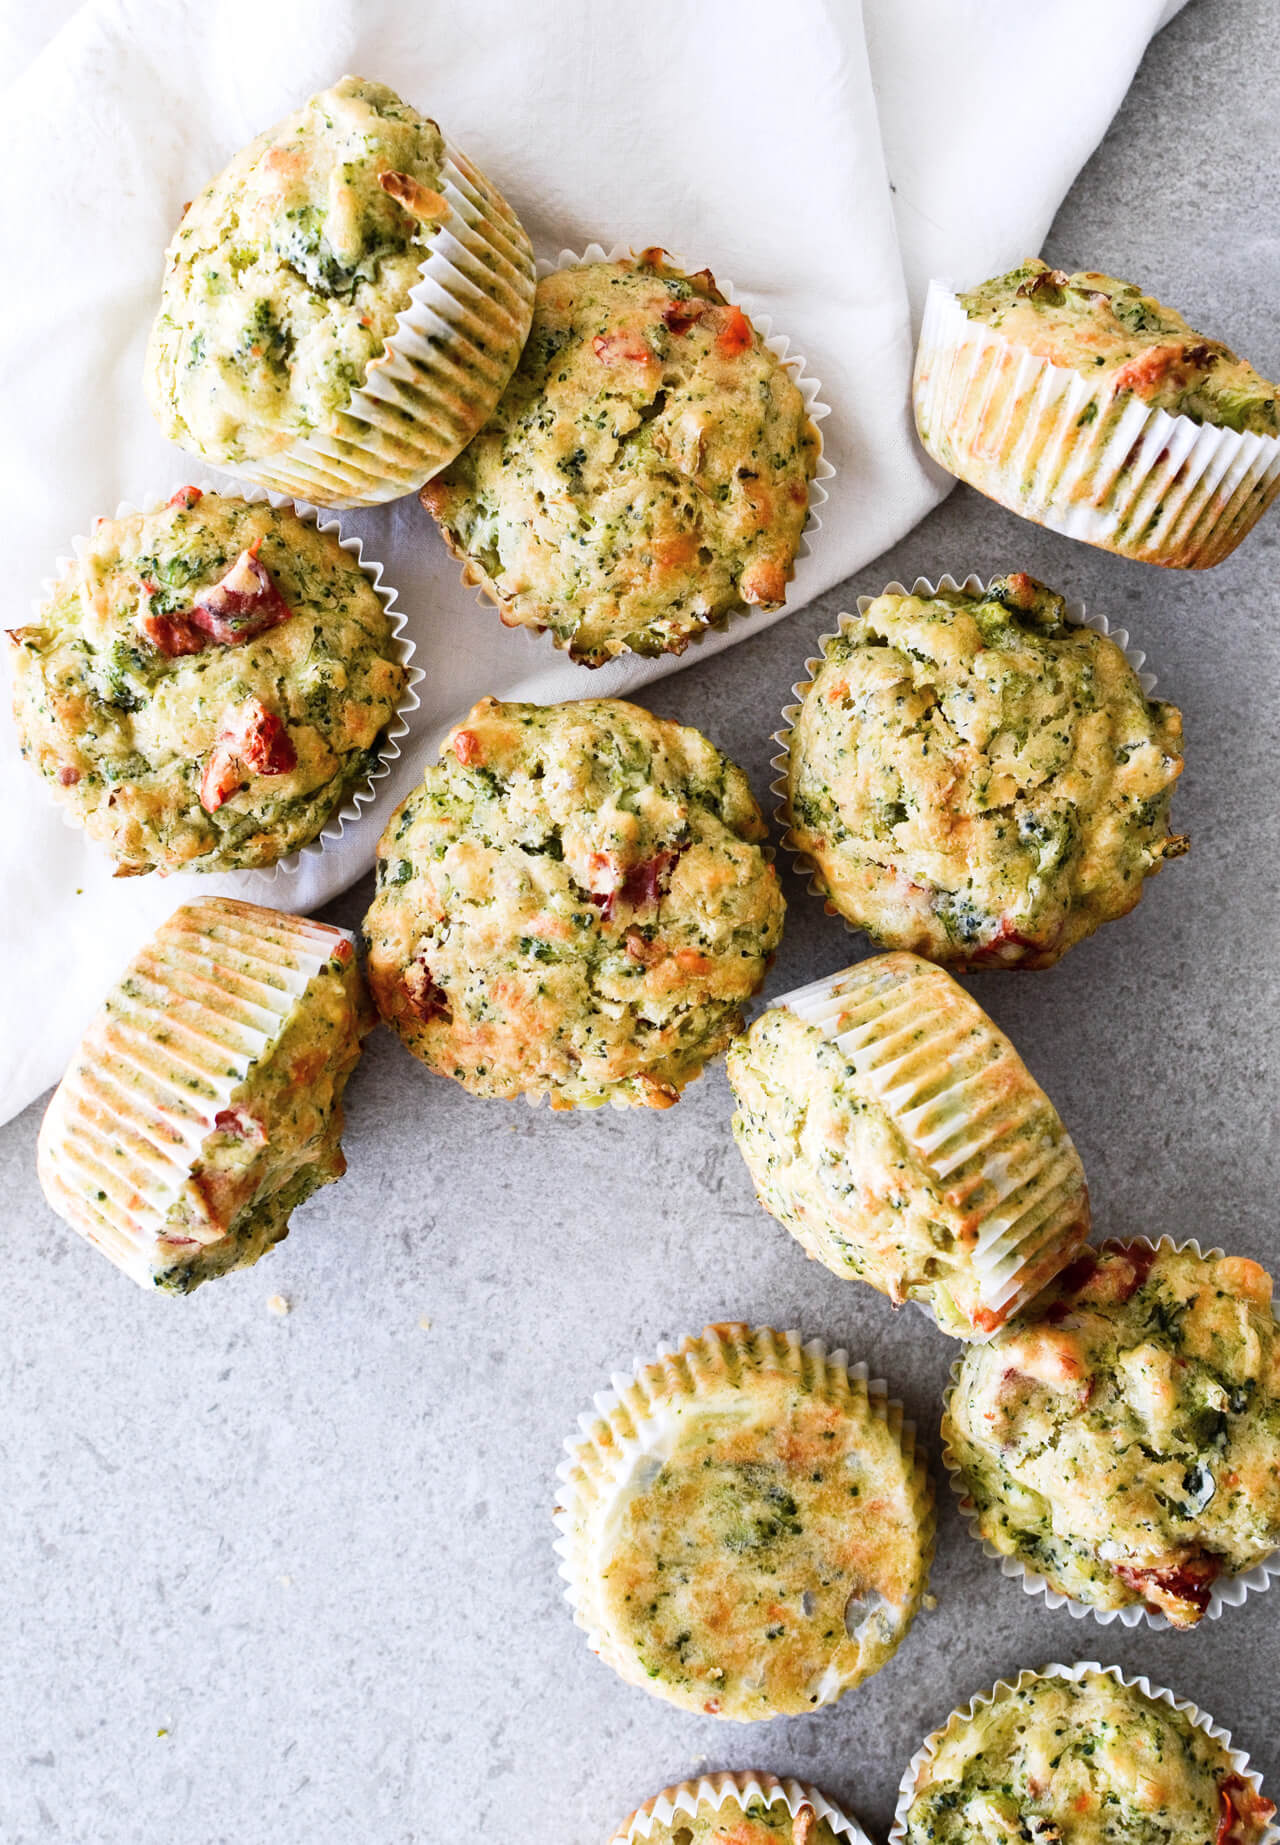 Olive oil broccoli muffins with cabbage and sun-dried tomatoes make the perfect breakfast on the go, or a side to your lunch salad or dinner meal. Great for kids too! 